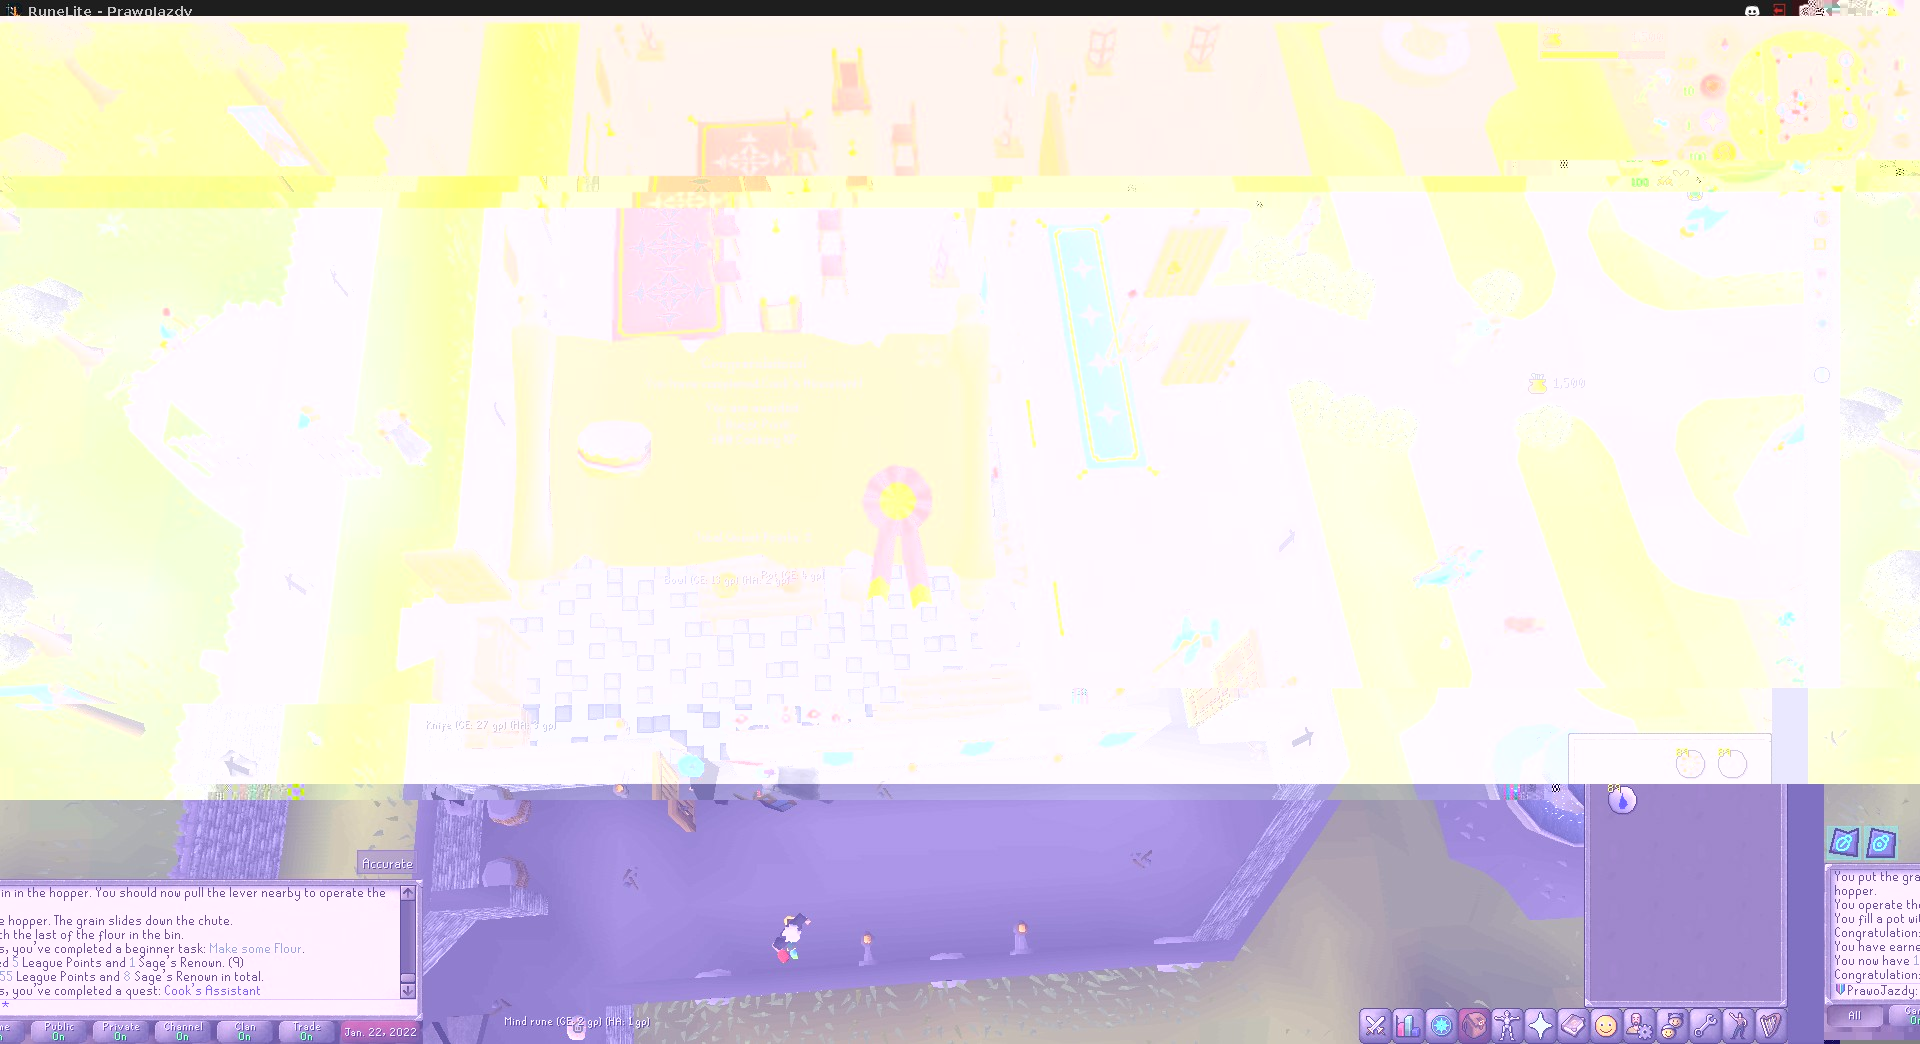 A screenshot of RuneScape after completing the Cook’s Assistant quest. All of the colors are yellow and desaturated, except for a purple-hued band in the lower third. The view is from overhead, and league fragments are visible in one corner.